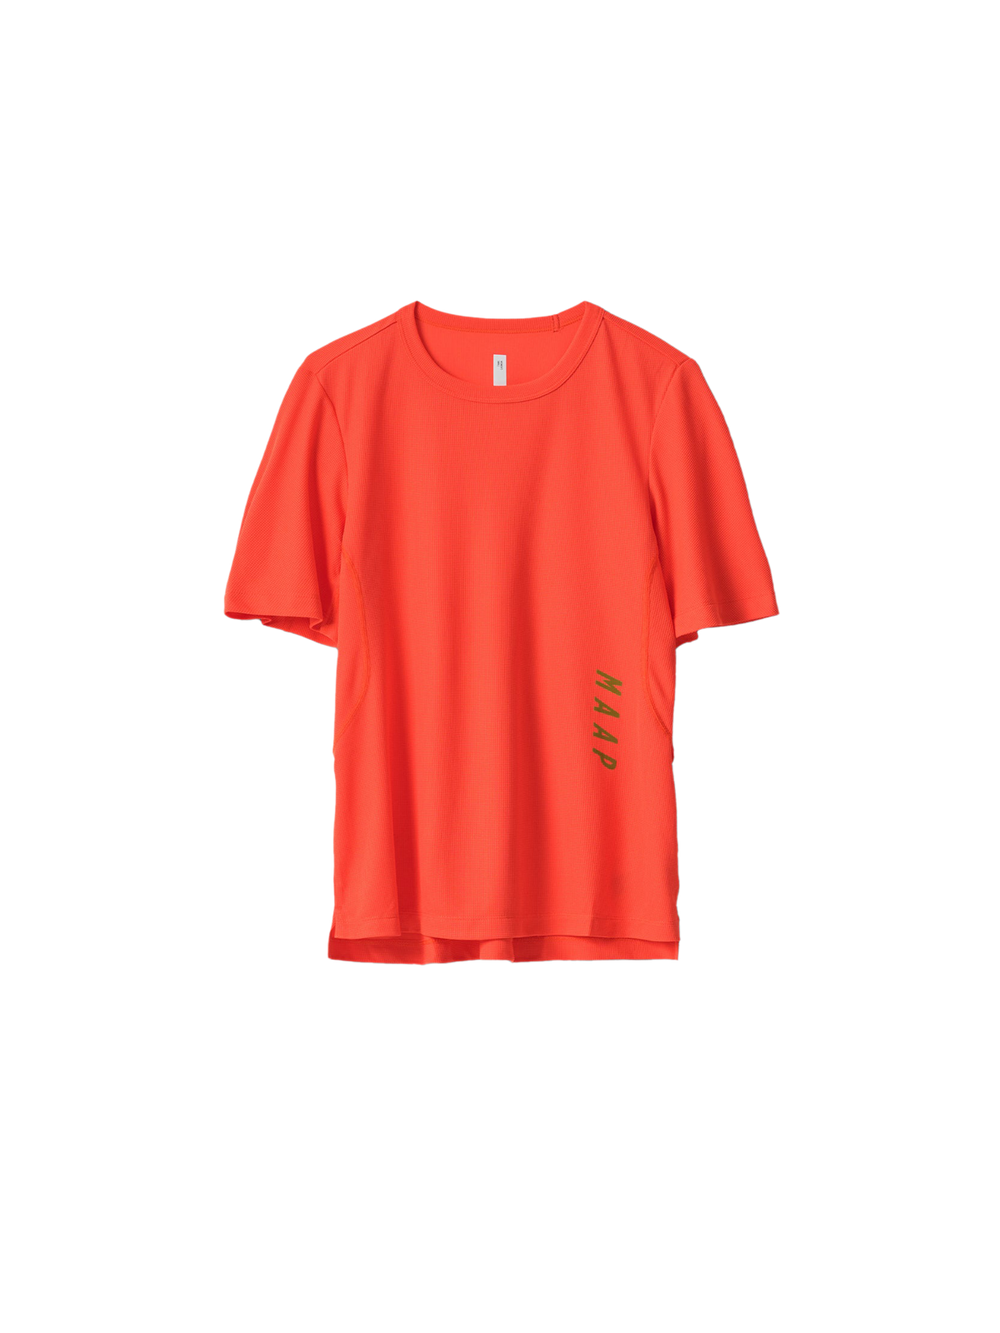 Product Image for Women's Alt_Road Ride Tee 3.0